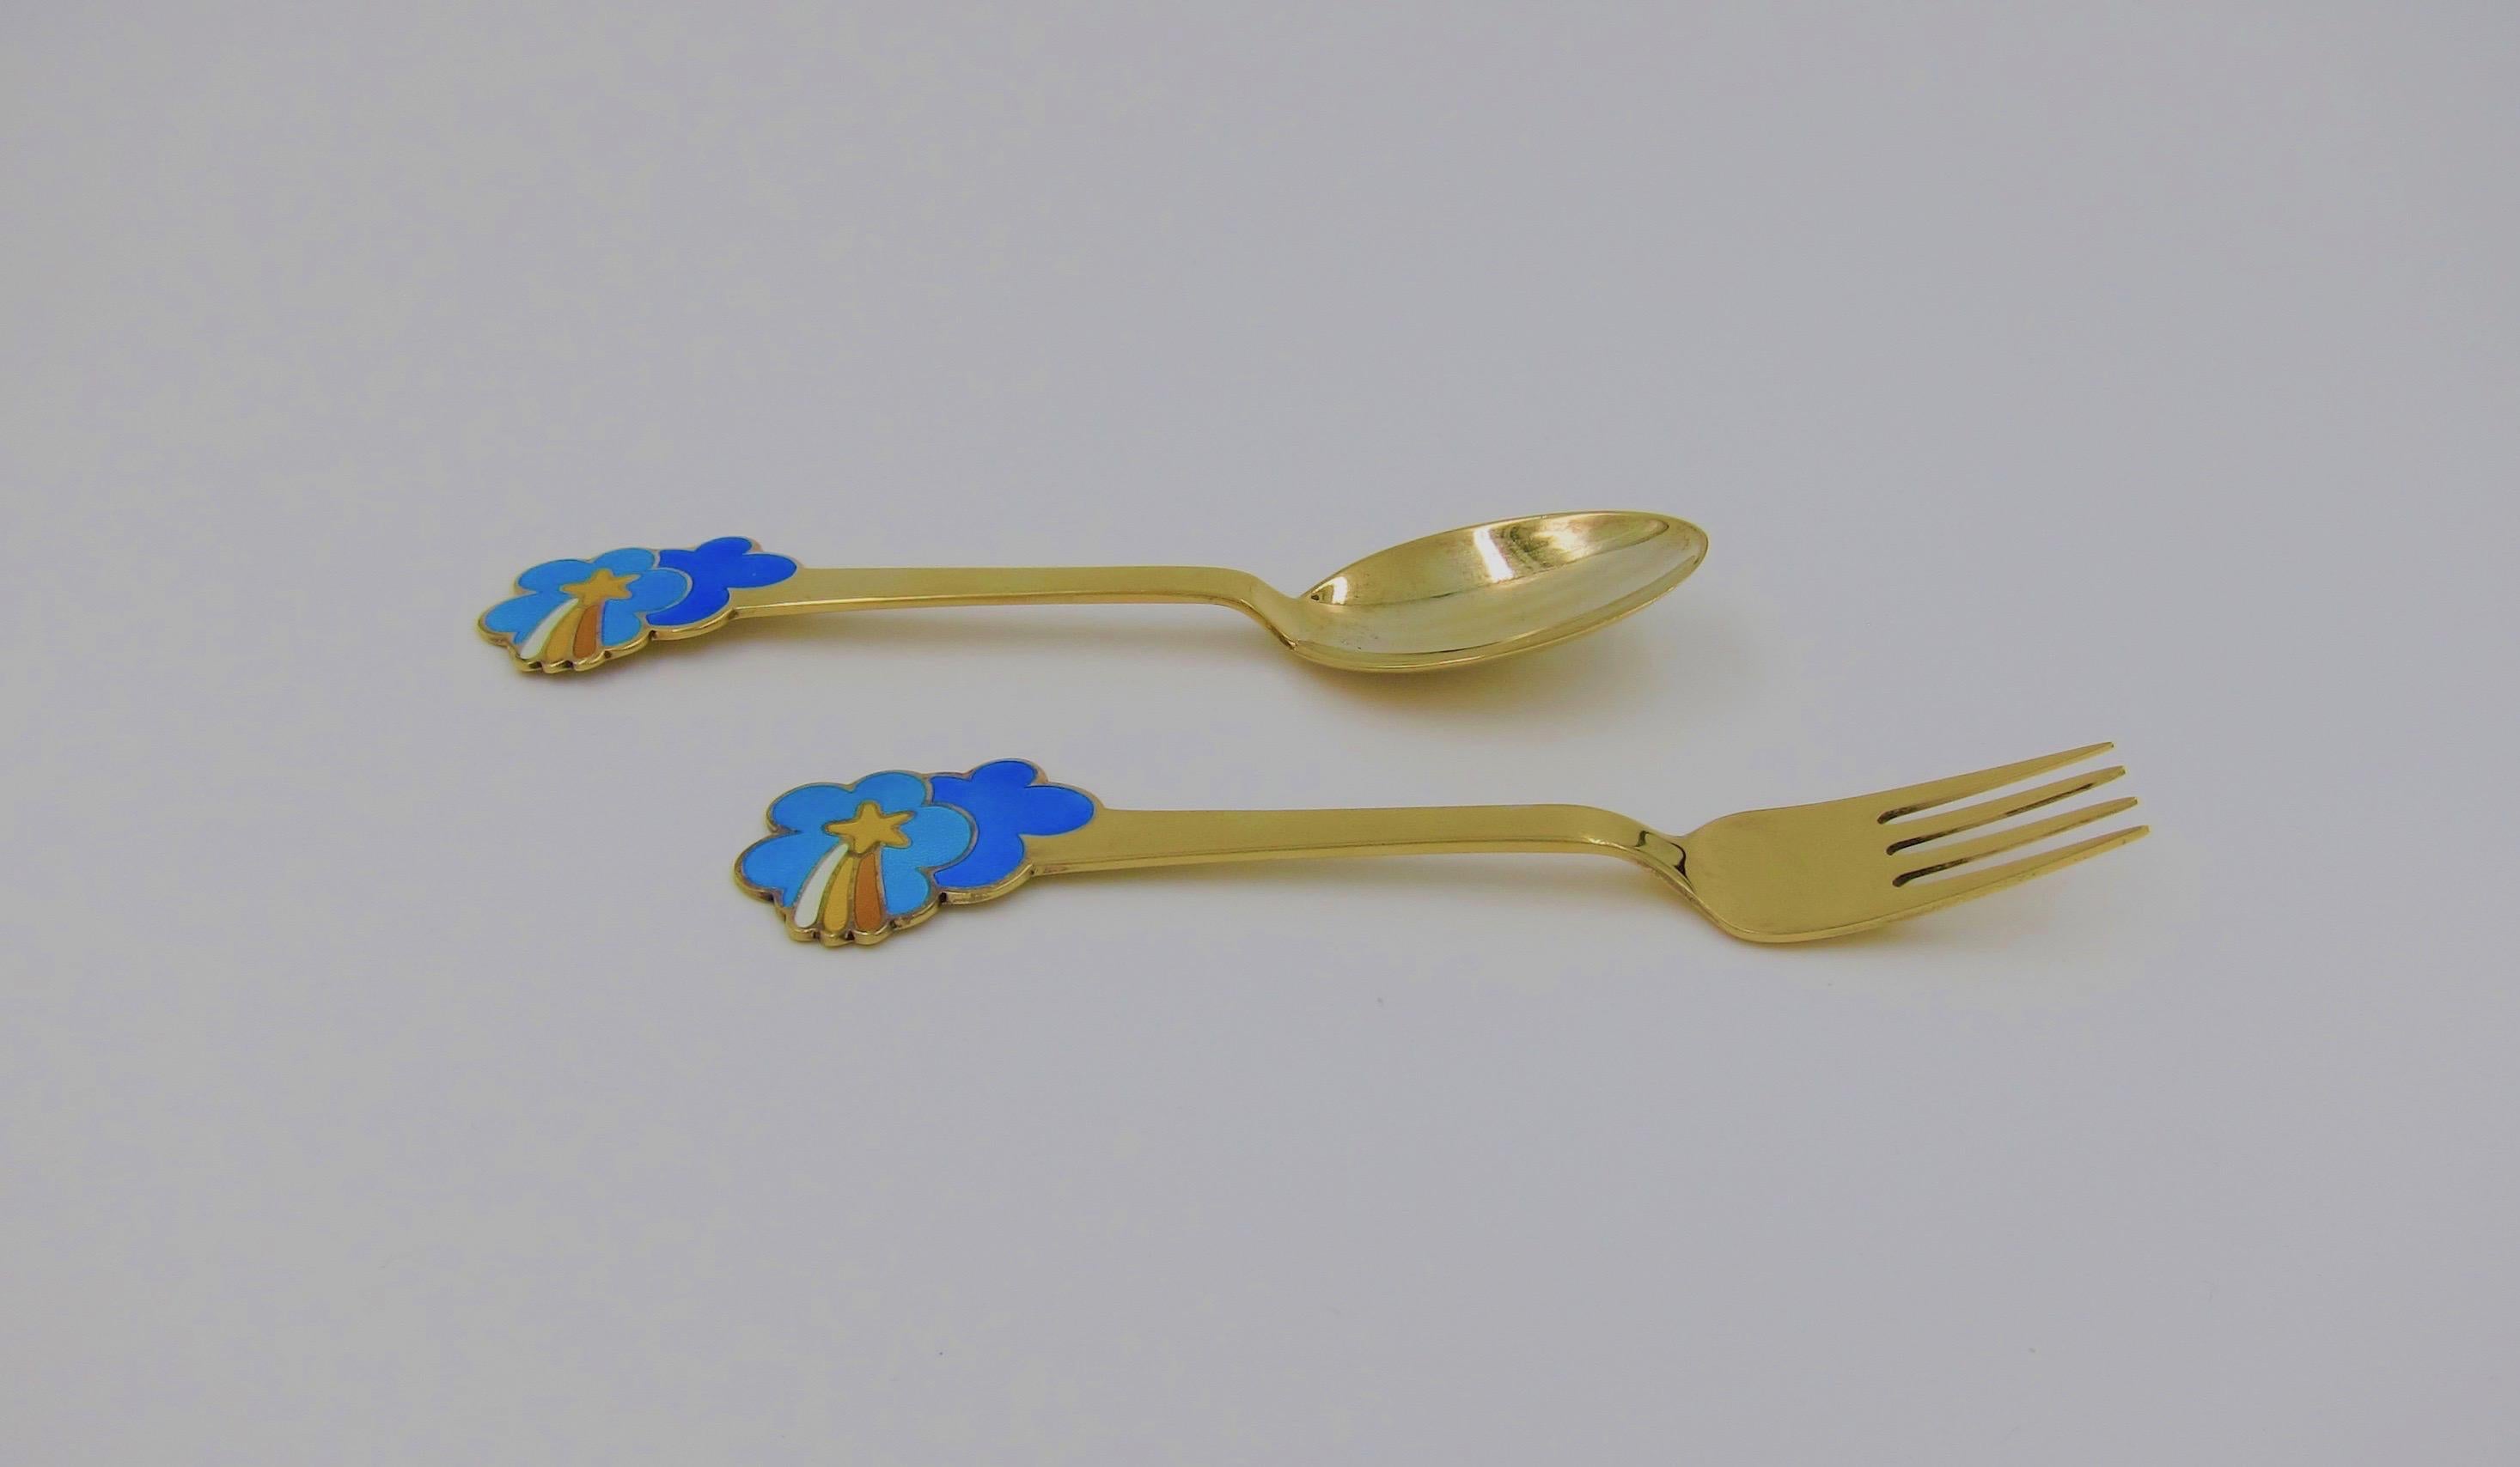 Danish 1975 Anton Michelsen Gilded Silver and Enamel Christmas Fork and Spoon Set